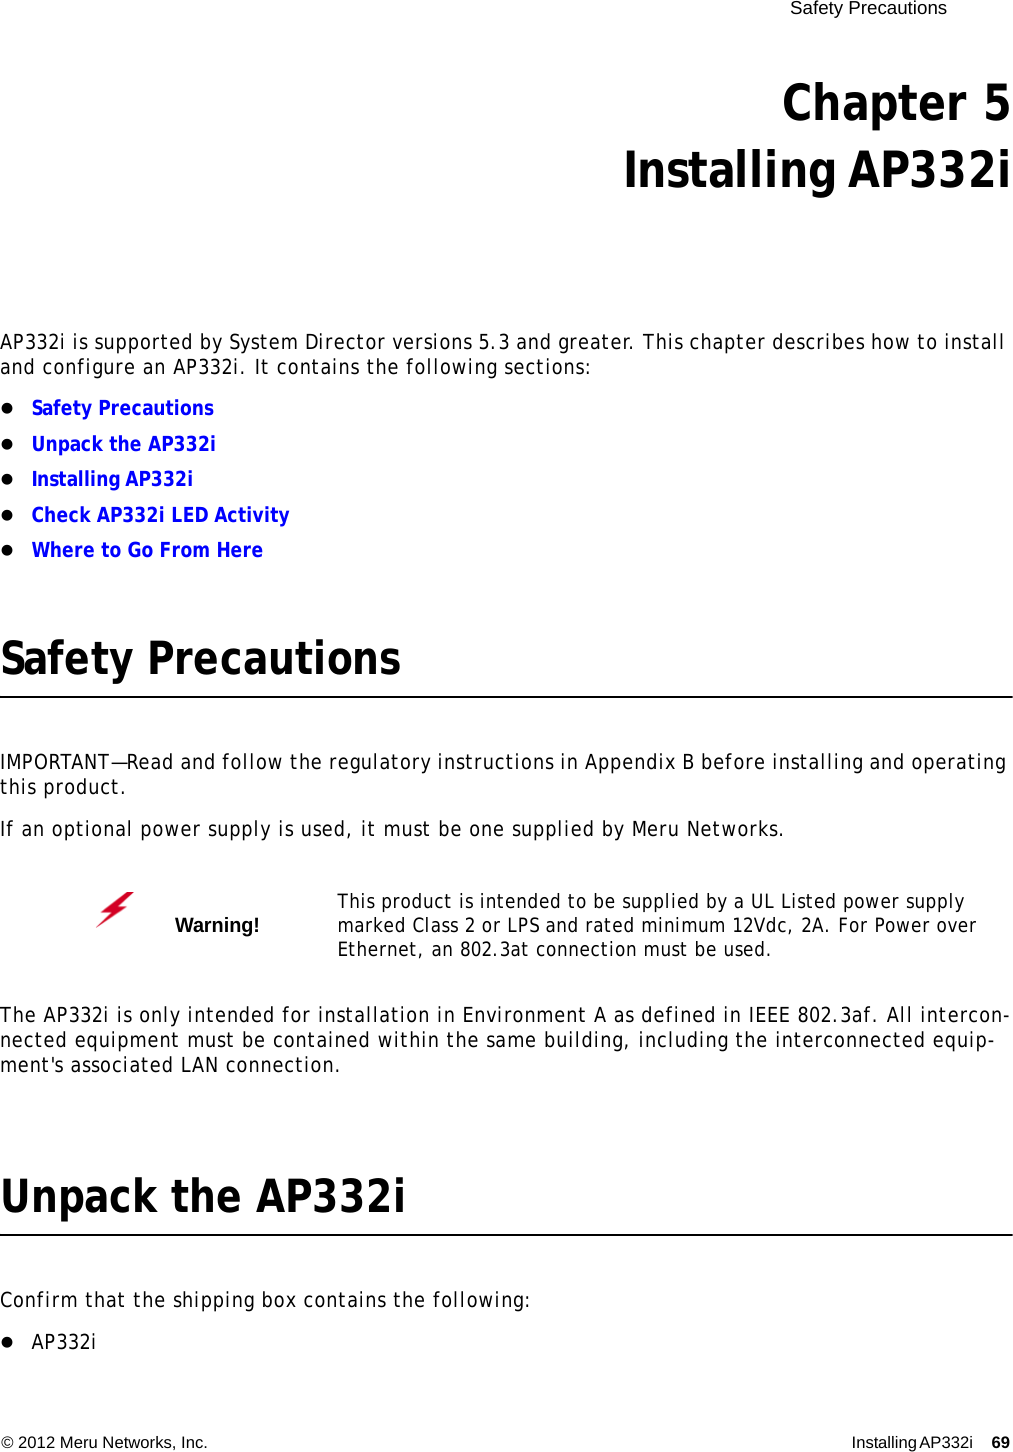  Safety Precautions © 2012 Meru Networks, Inc. Installing AP332i 69 Chapter 5Installing AP332iAP332i is supported by System Director versions 5.3 and greater. This chapter describes how to install and configure an AP332i. It contains the following sections:Safety PrecautionsUnpack the AP332iInstalling AP332iCheck AP332i LED ActivityWhere to Go From HereSafety PrecautionsIMPORTANT—Read and follow the regulatory instructions in Appendix B before installing and operating this product.If an optional power supply is used, it must be one supplied by Meru Networks.The AP332i is only intended for installation in Environment A as defined in IEEE 802.3af. All intercon-nected equipment must be contained within the same building, including the interconnected equip-ment&apos;s associated LAN connection.Unpack the AP332iConfirm that the shipping box contains the following:AP332iWarning!   This product is intended to be supplied by a UL Listed power supply marked Class 2 or LPS and rated minimum 12Vdc, 2A. For Power over Ethernet, an 802.3at connection must be used.